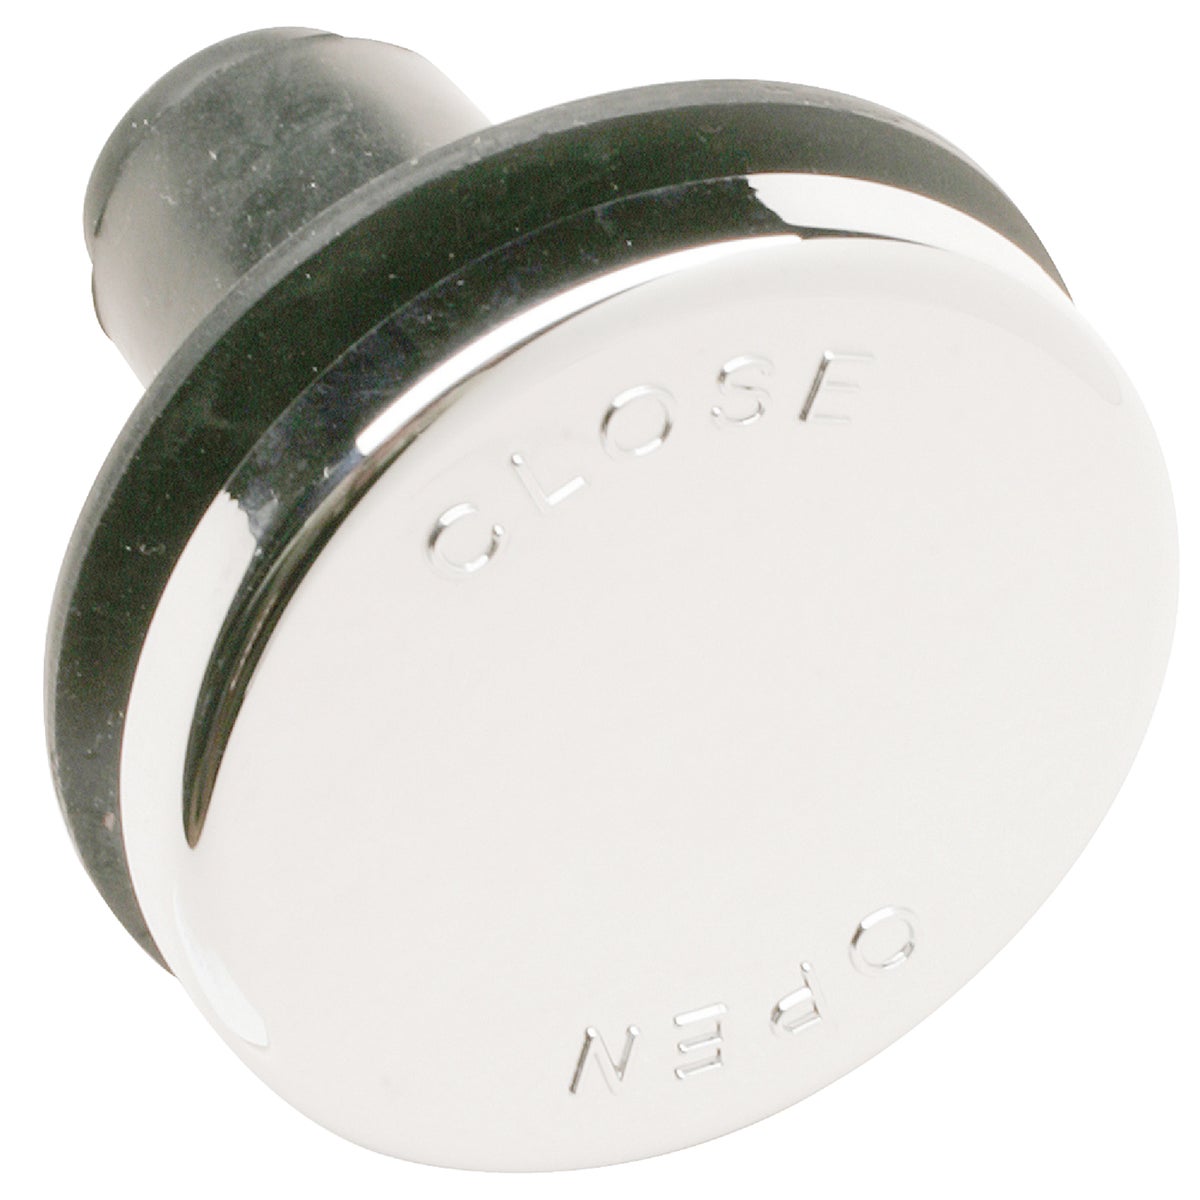 Do it Toe-Touch 5/16 In. Thread Tub Drain Stopper Cartridge in Polished Chrome